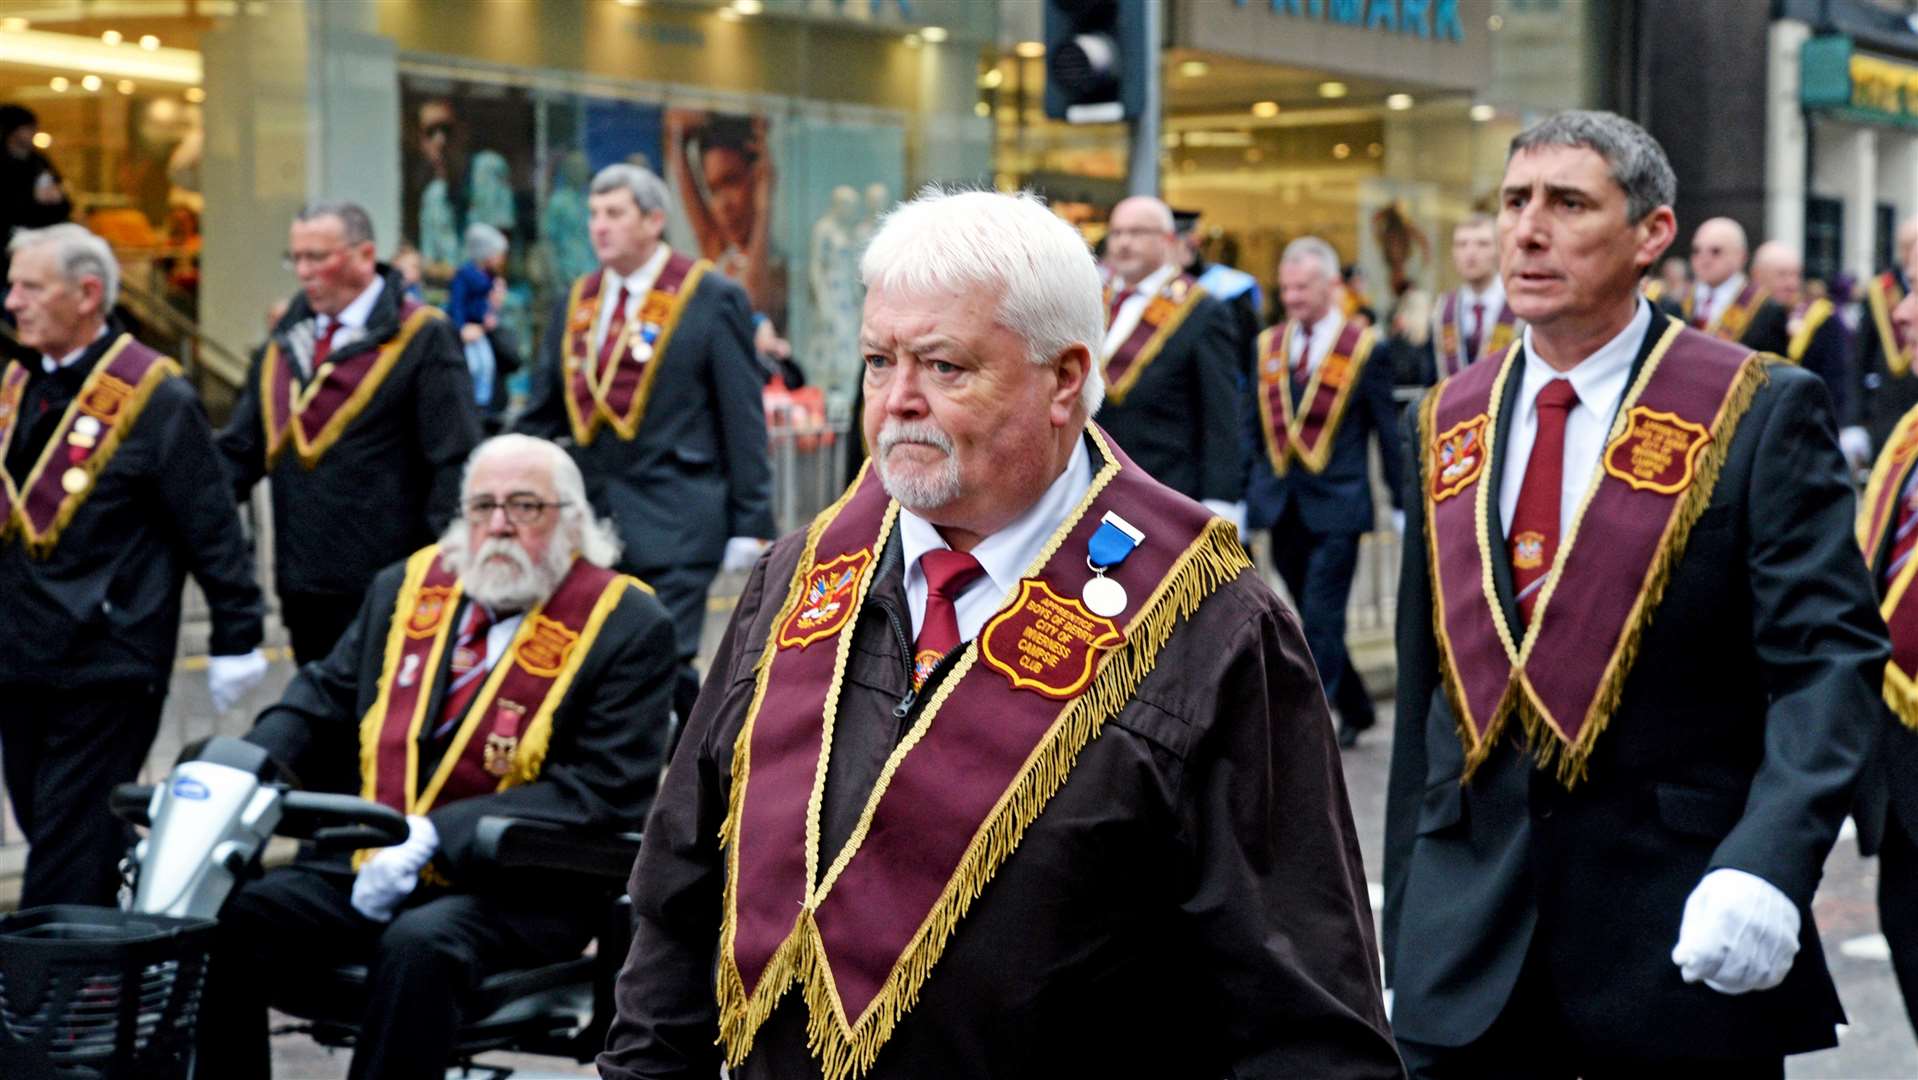 A previous march through Inverness by the Apprentice Boys of Derry.